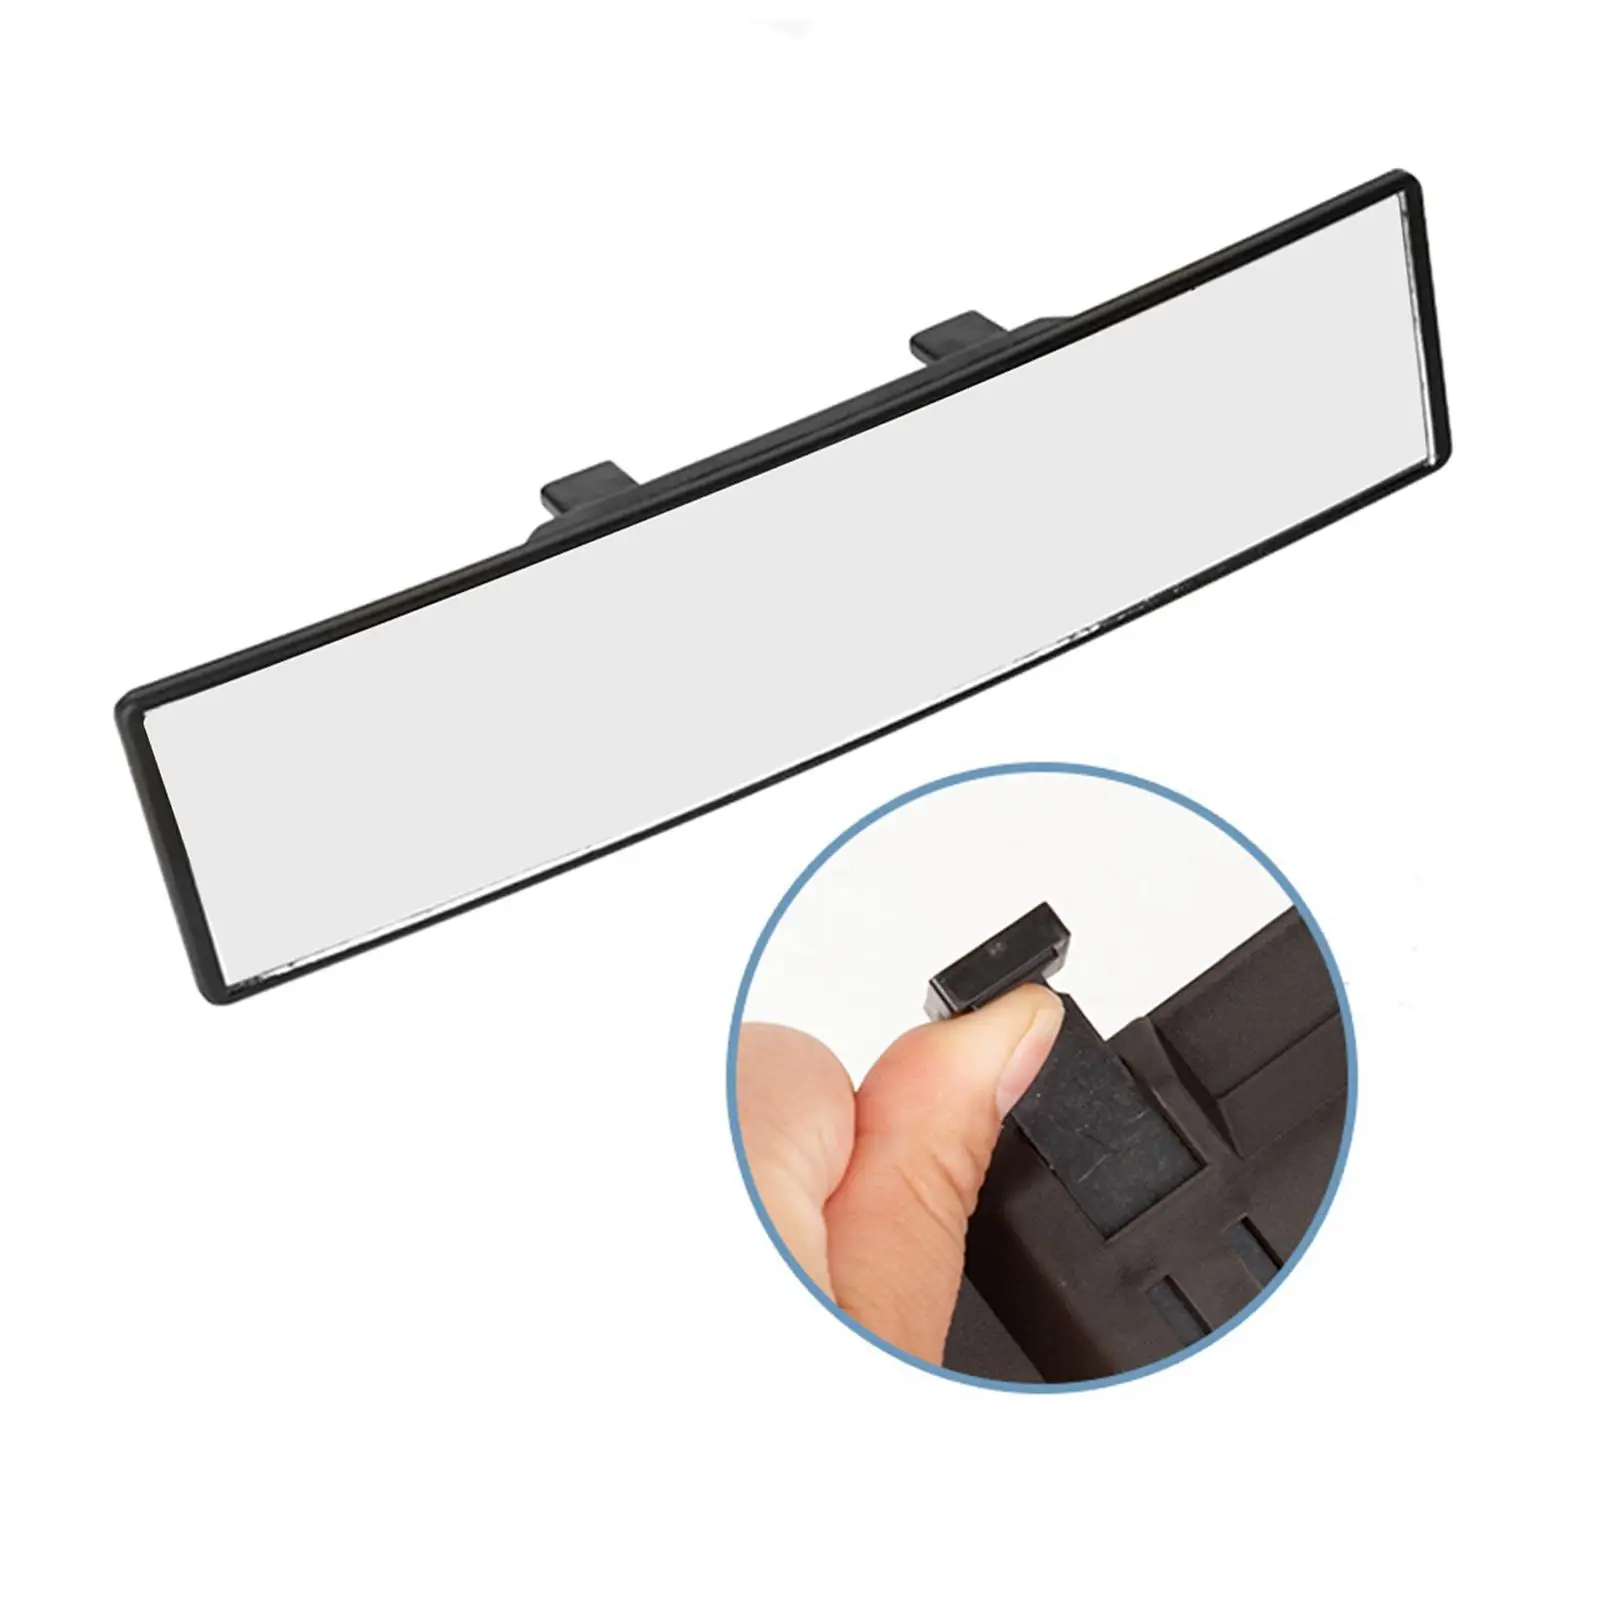 Rear View Mirror Reduces Blind Spot Effectively Easy Installation Panoramic Rearview Mirror for Vehicles Car Trucks SUV Van